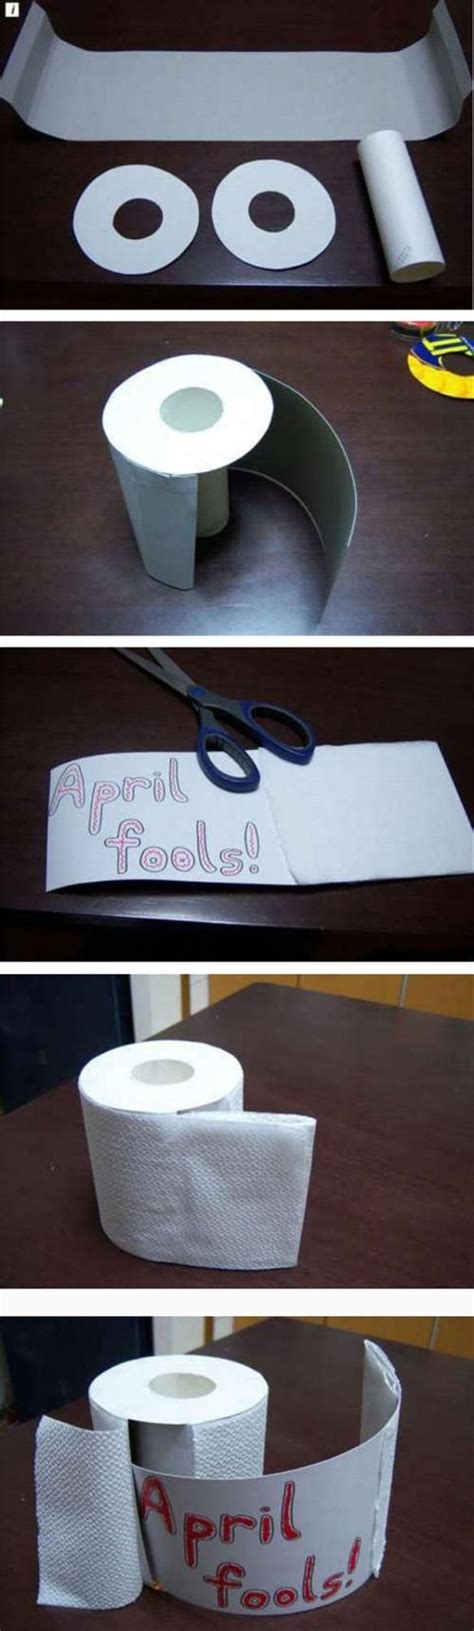 #findmeafunnyvideo #aprilfools #pranks funny april fools' pranks and jokes, that you can try at home. 8 Coolest Kid April Fools' Day Pranks | | April fools pranks, Best april fools pranks, Good pranks